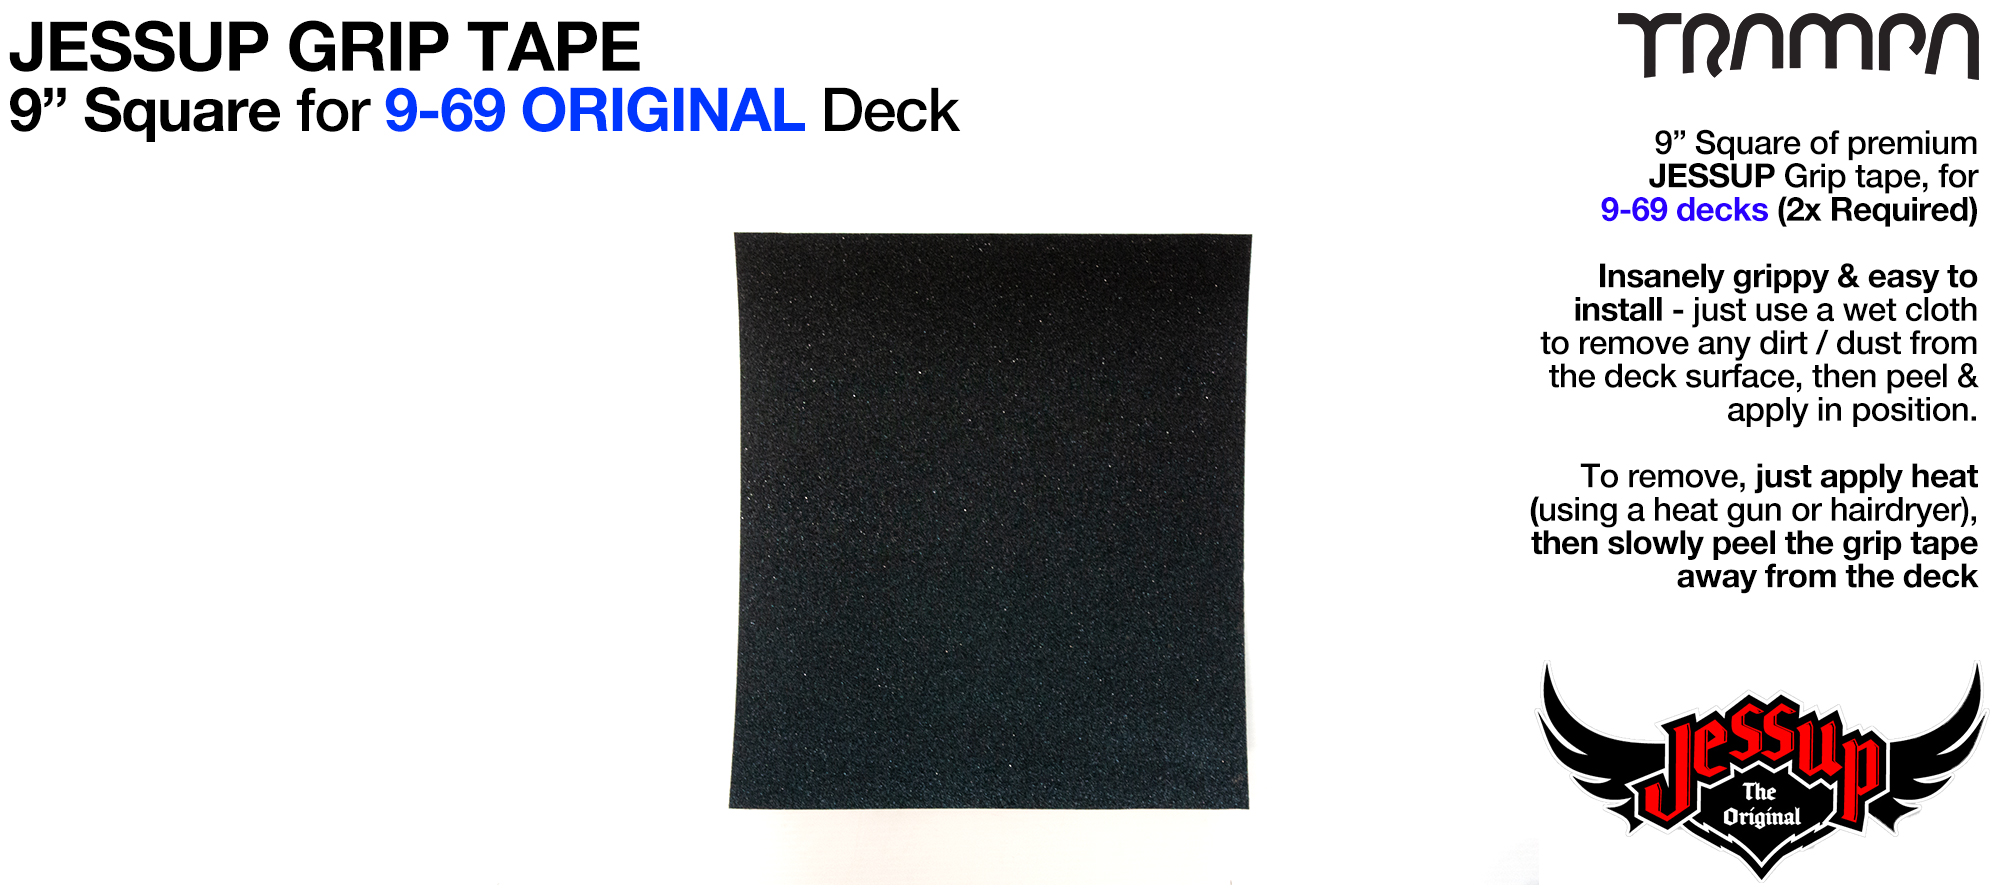 1x 9 Inch squares of Top Quality Jessup Grip tape